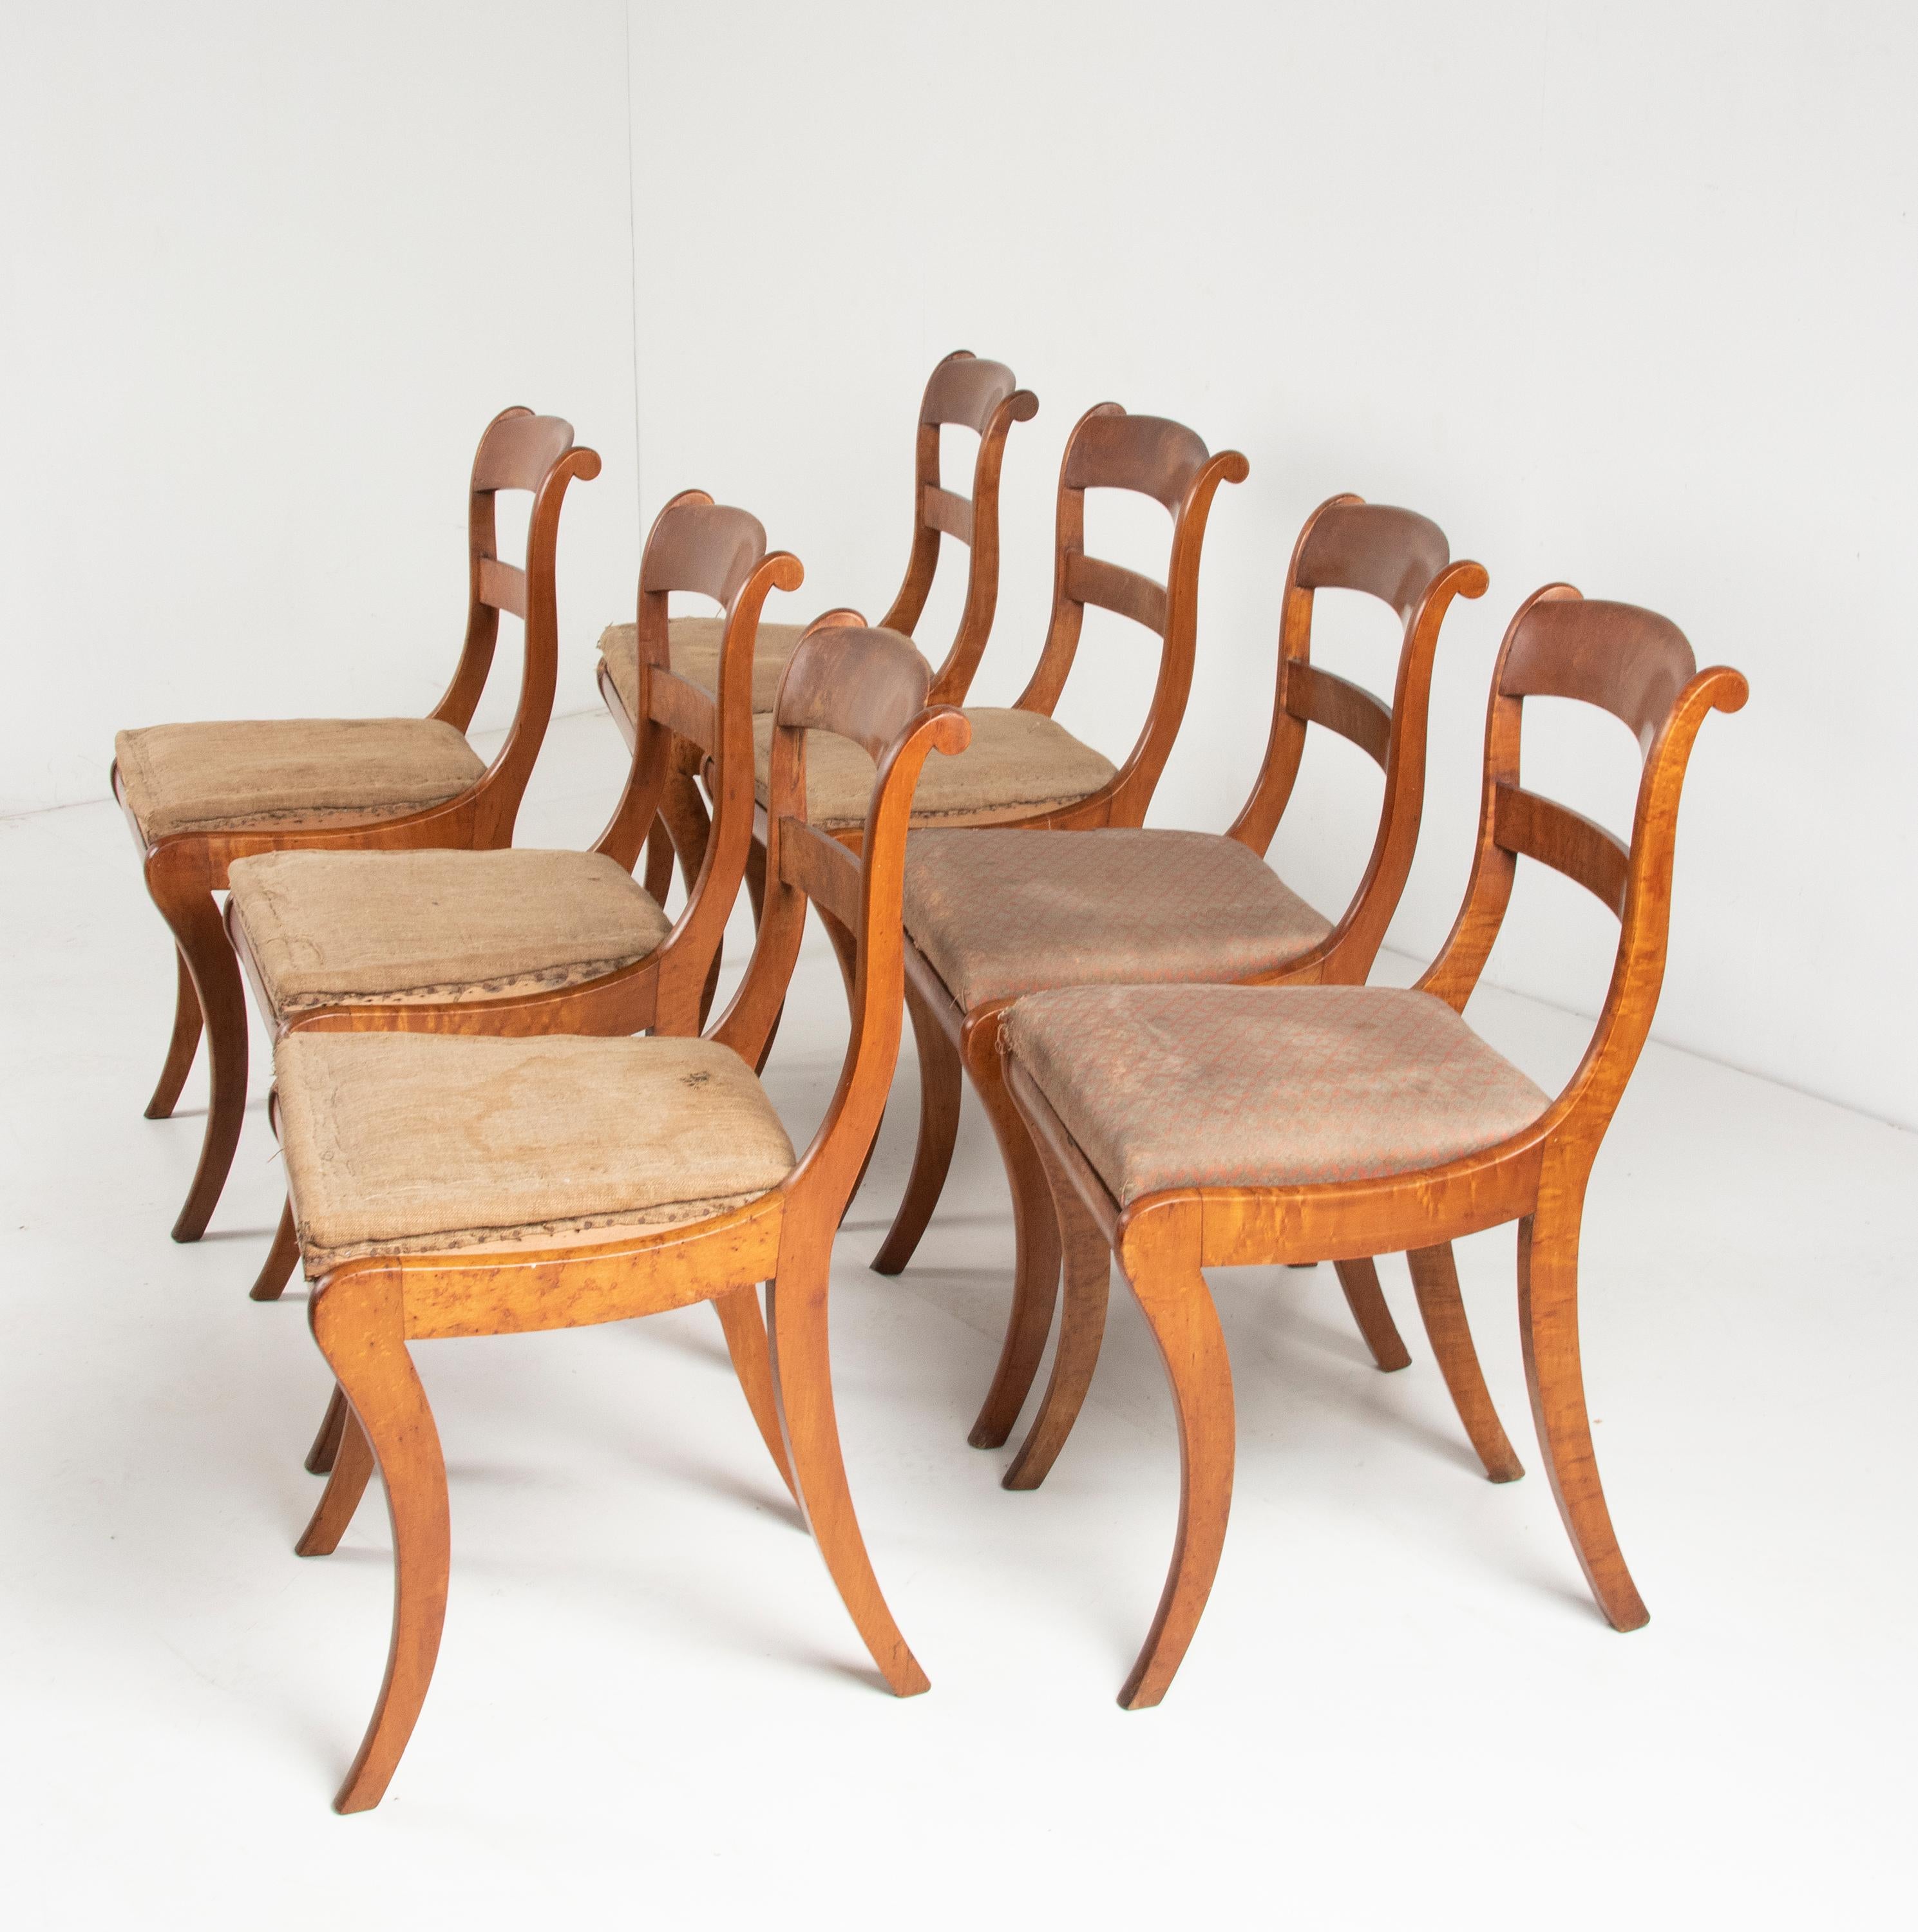 A set of seven dining chairs from the French Charles X period. Made of Bird-eye maple wood. These antique chairs have an elegant design. The curved saber legs gives the chairs a nice appearance. The chairs are constructively sturdy. The seats of the